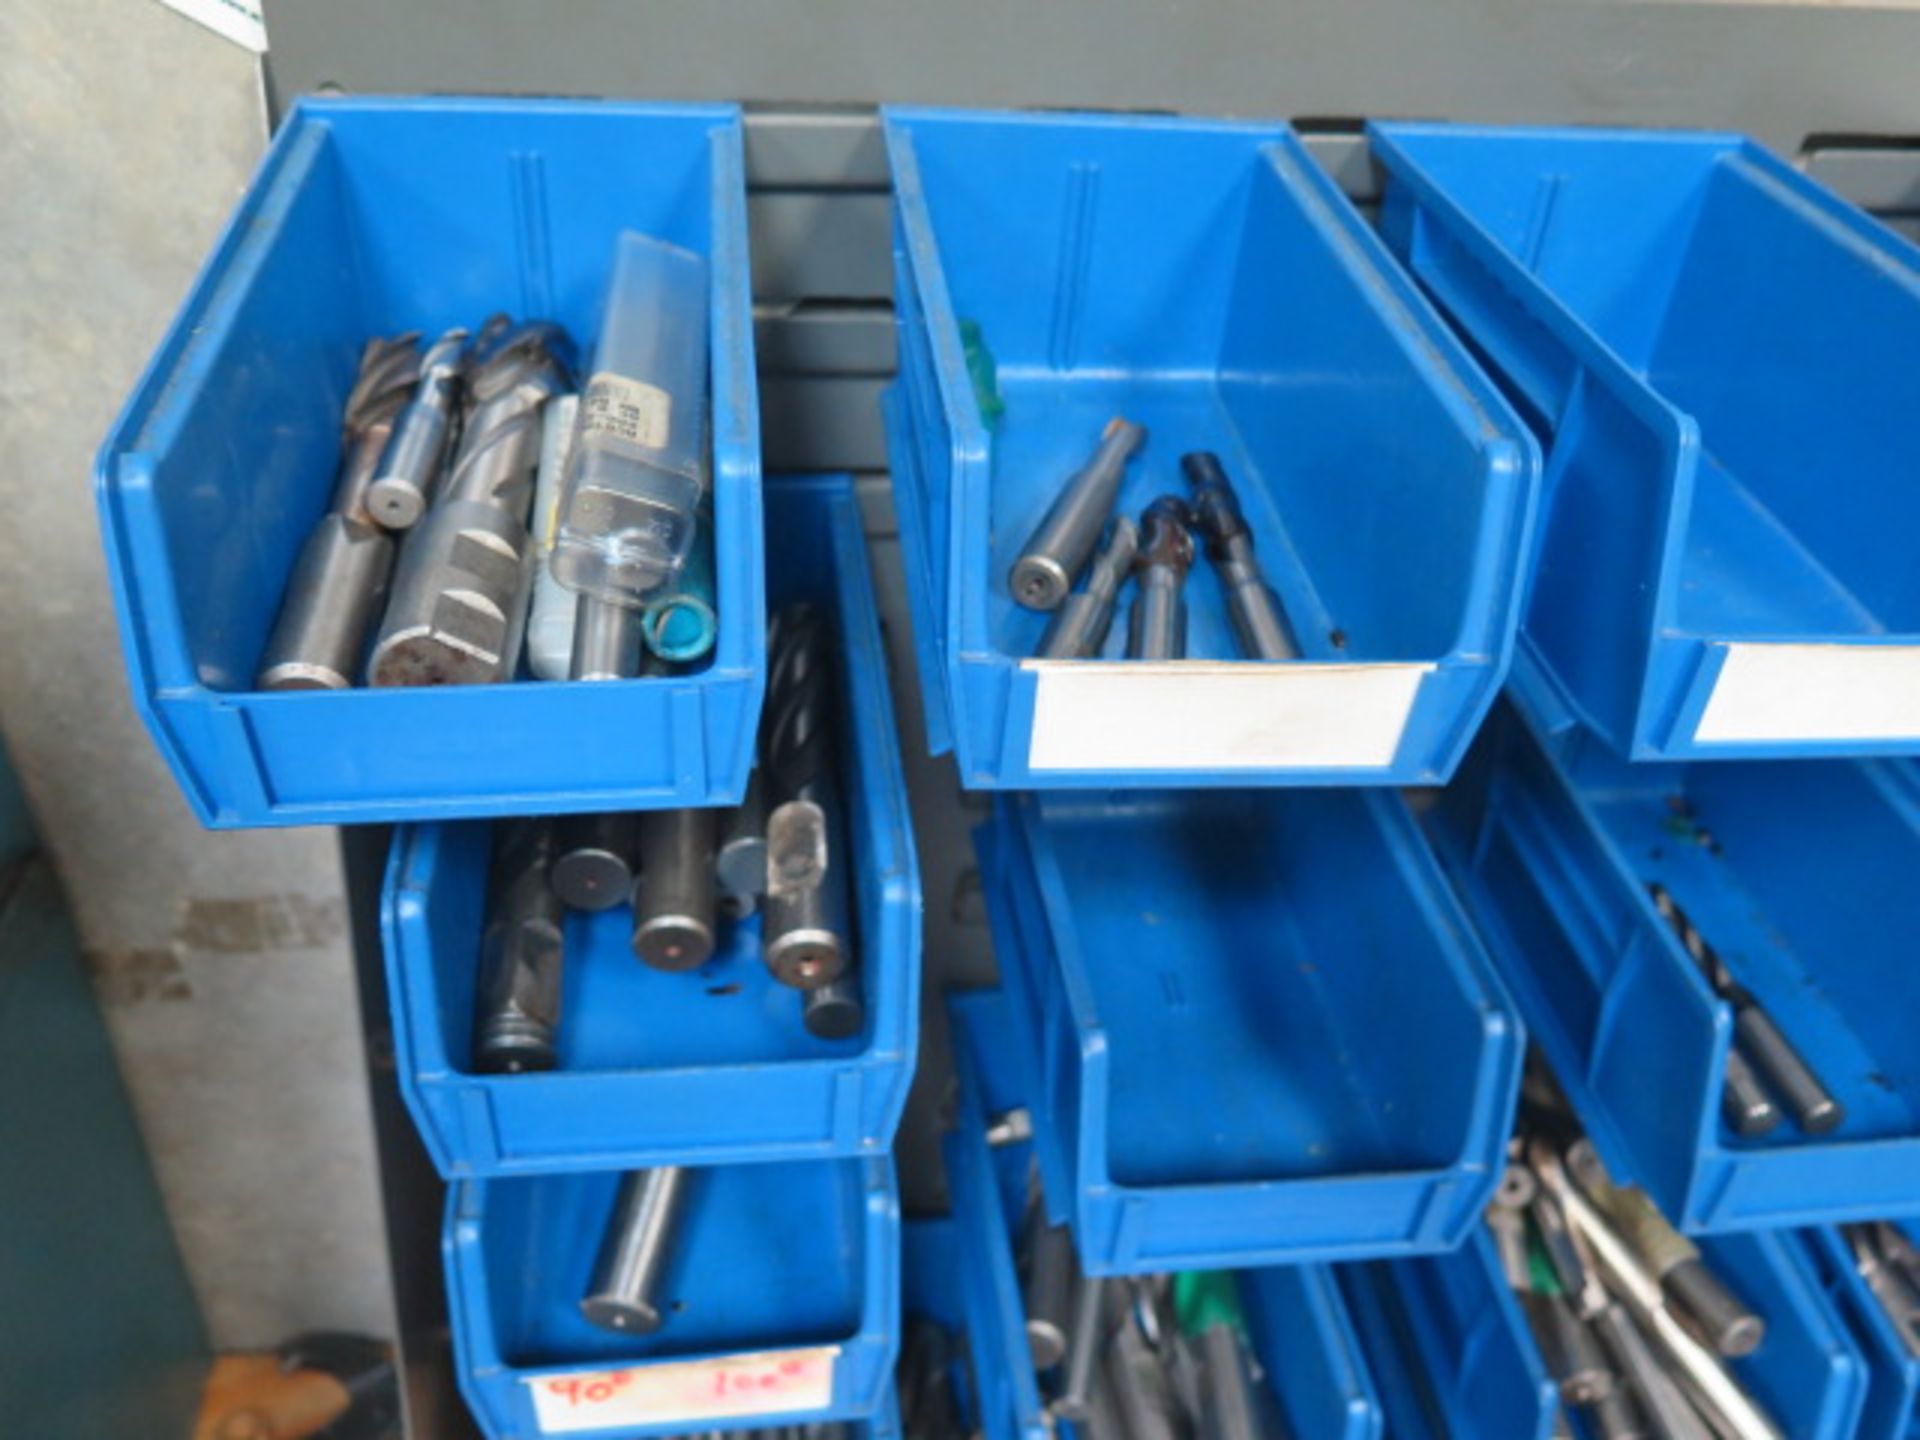 Drawered Cabinets w/ Drills and Bin Rack w/ Bins and Endmills (SOLD AS-IS - NO WARRANTY) - Image 8 of 8